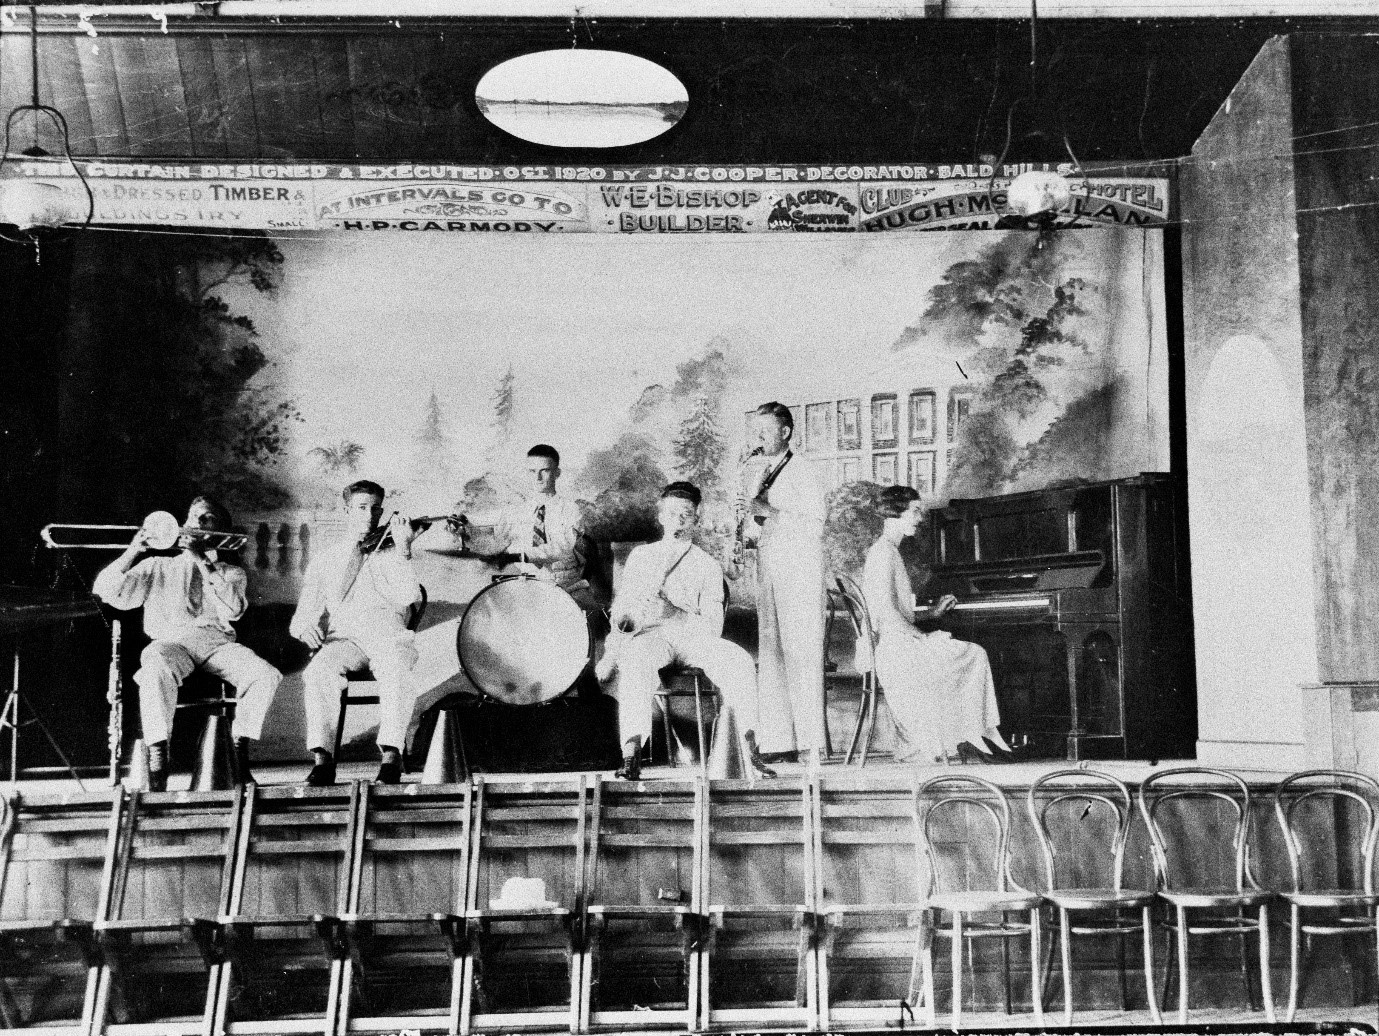 Black and white image of six people playing instruments on a stage at Caboolture, ca. 1929.